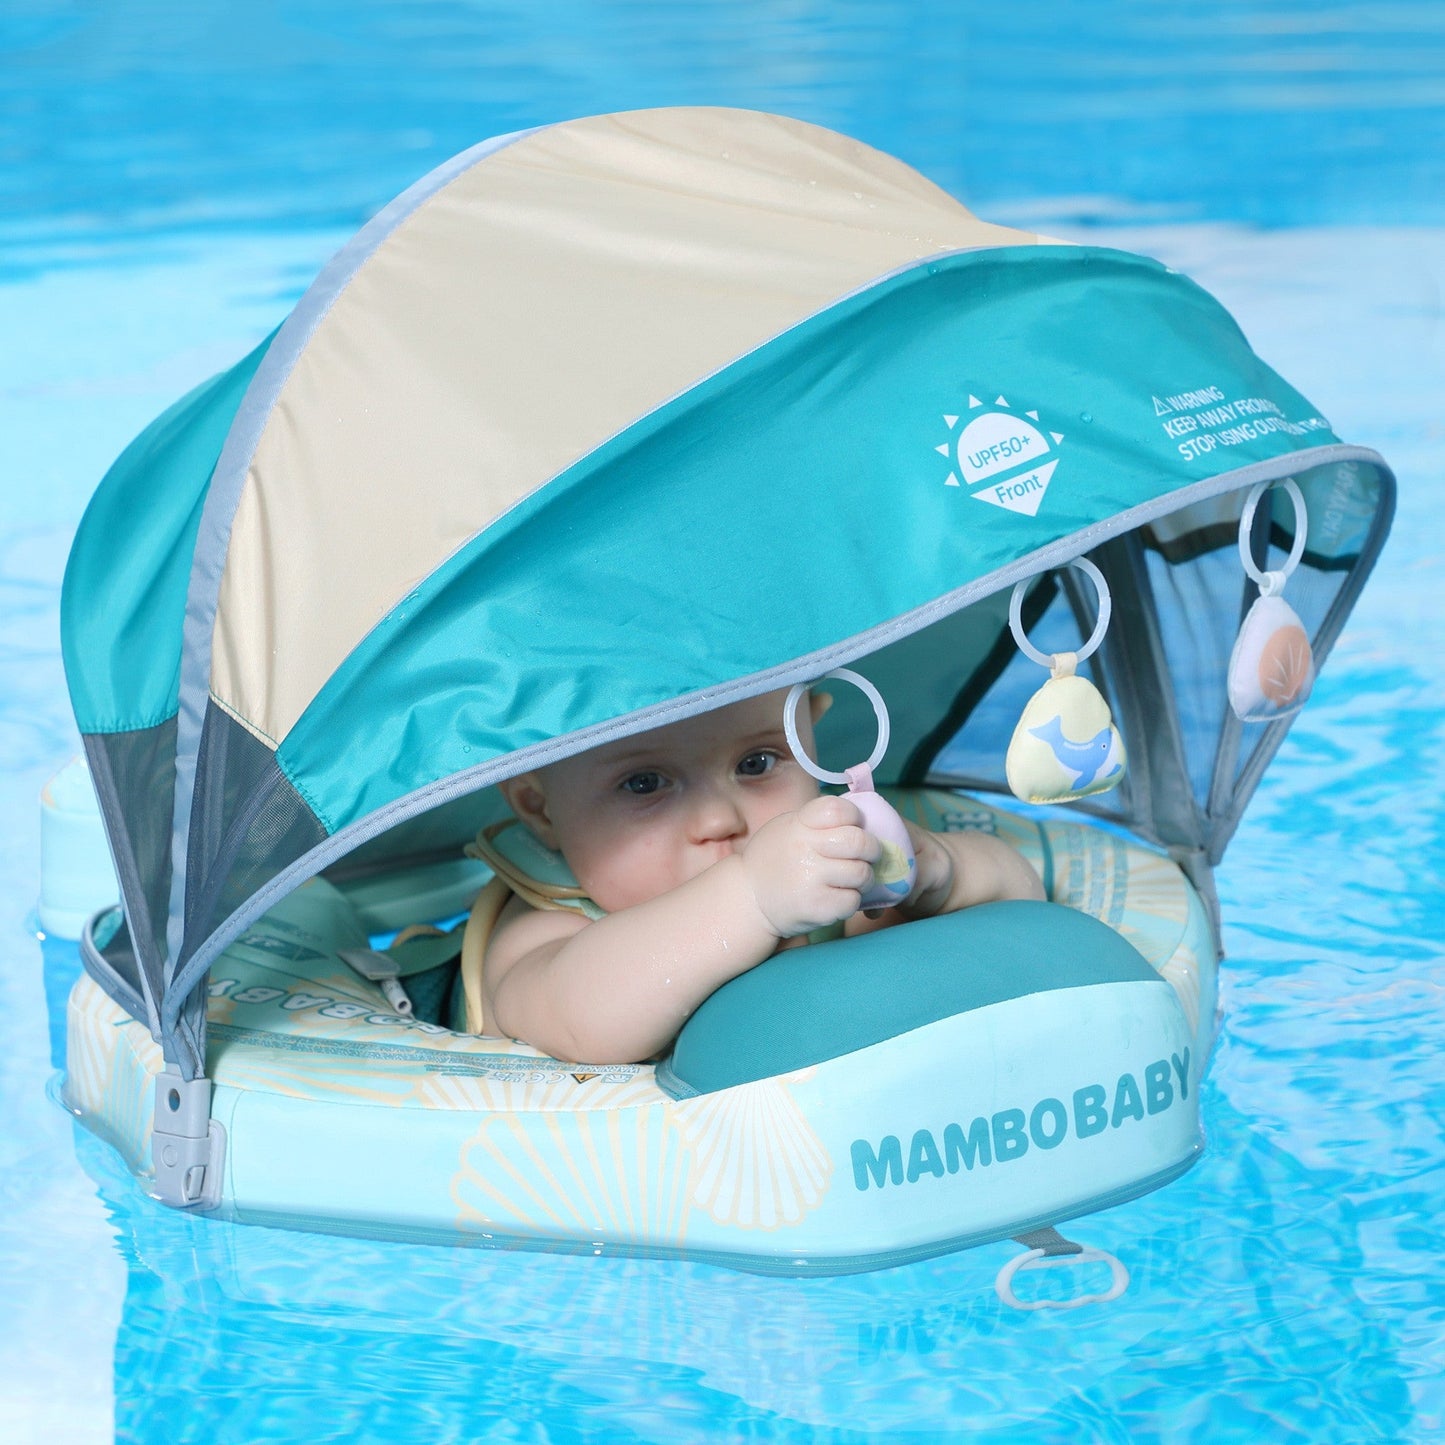 Mambobaby Float Seashell with Canopy Non-Inflatable Waist Swim Ring for Toddlers